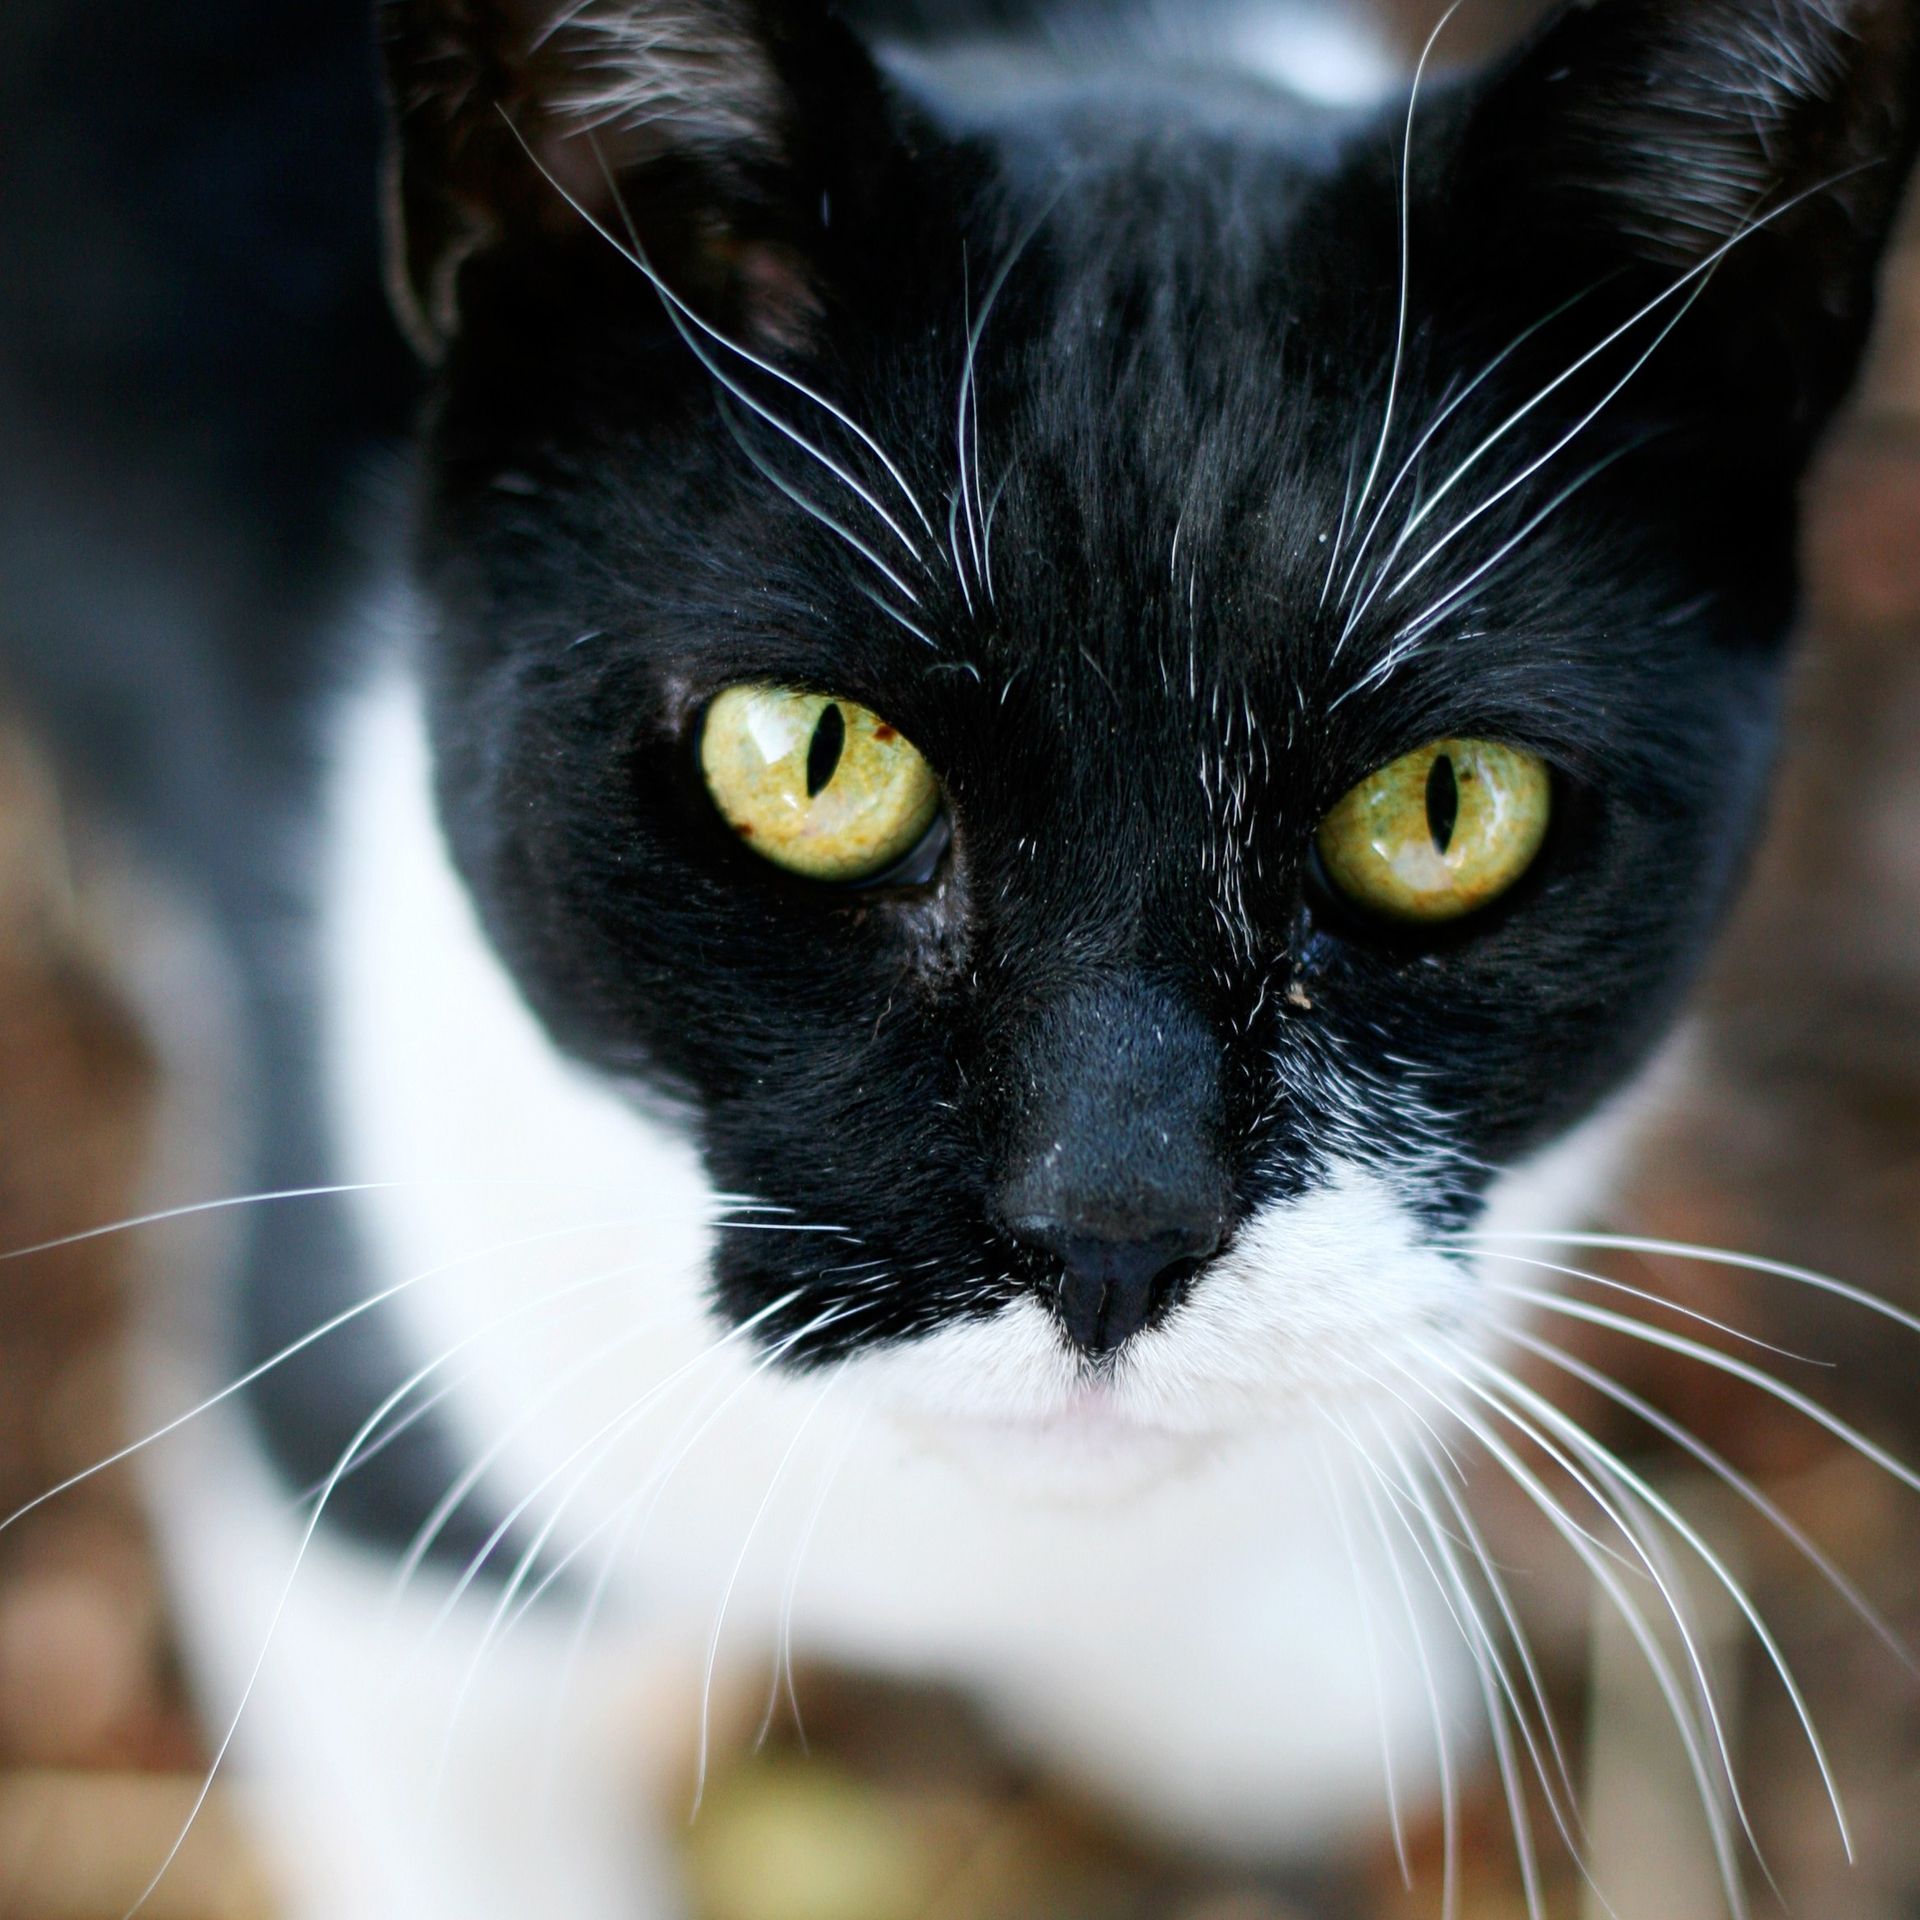 A portrait of a black and white cat.